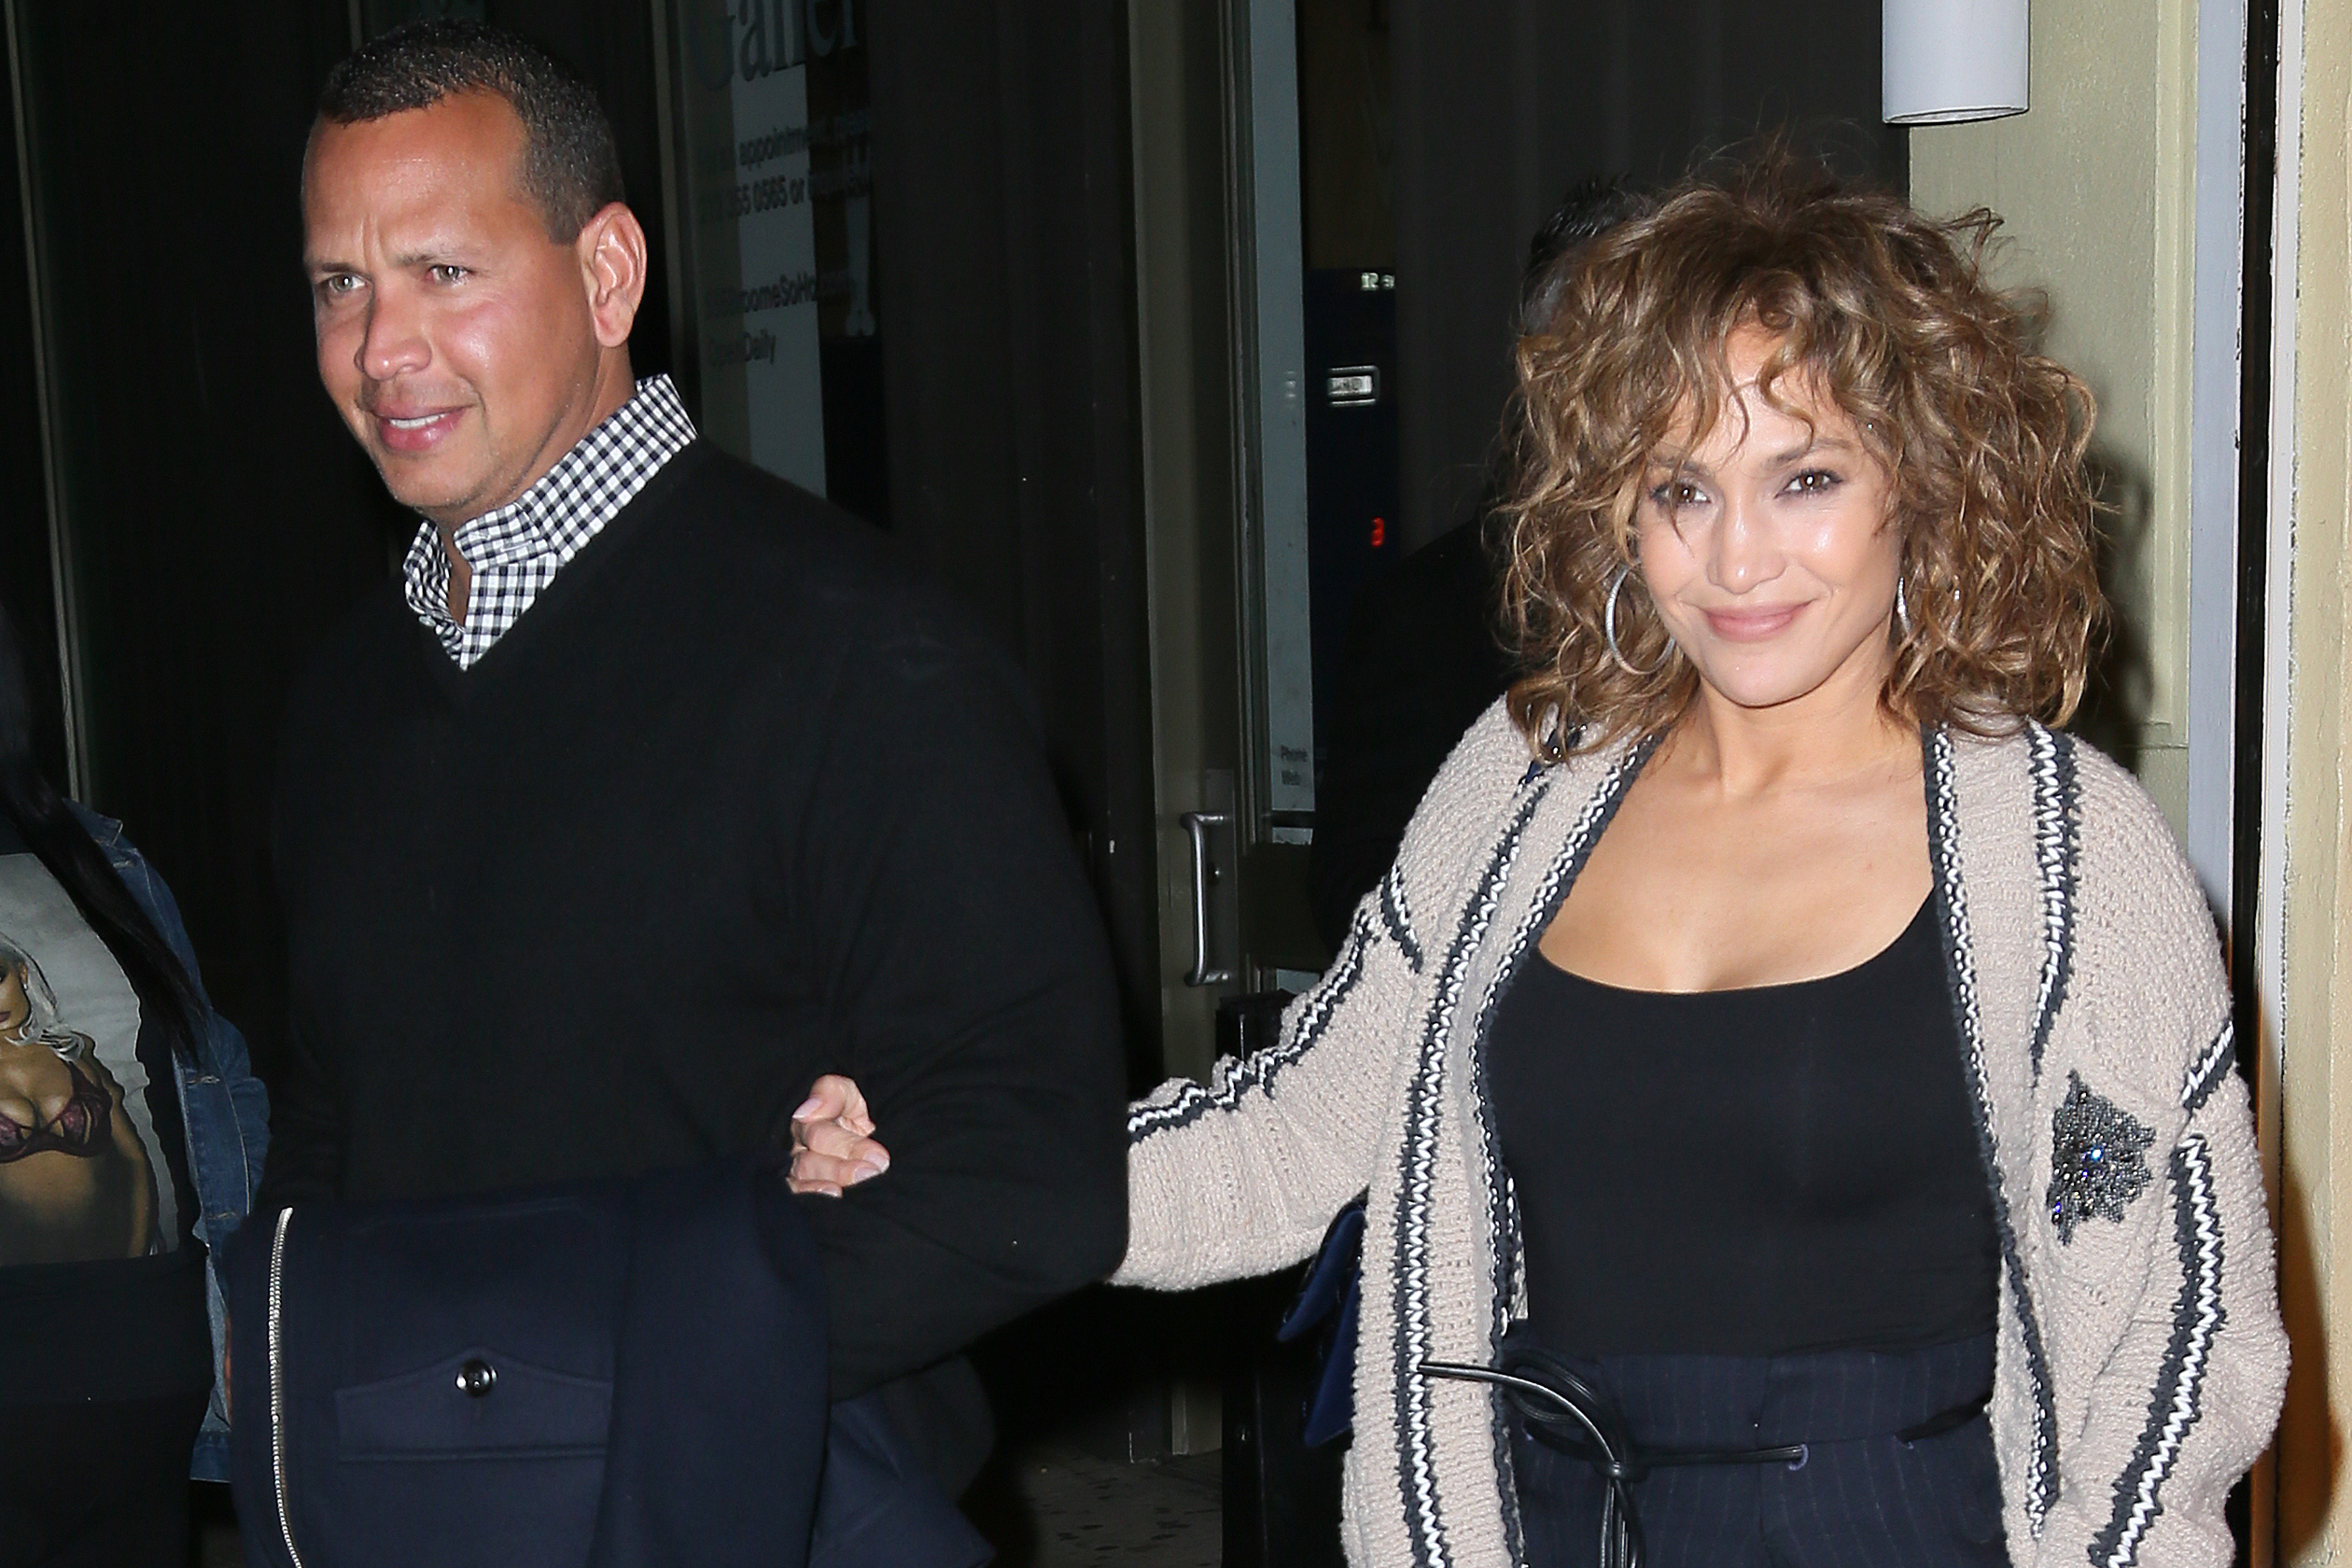 Jennifer Lopez Coaches Alex Rodriguezs Daughter With Singing picture